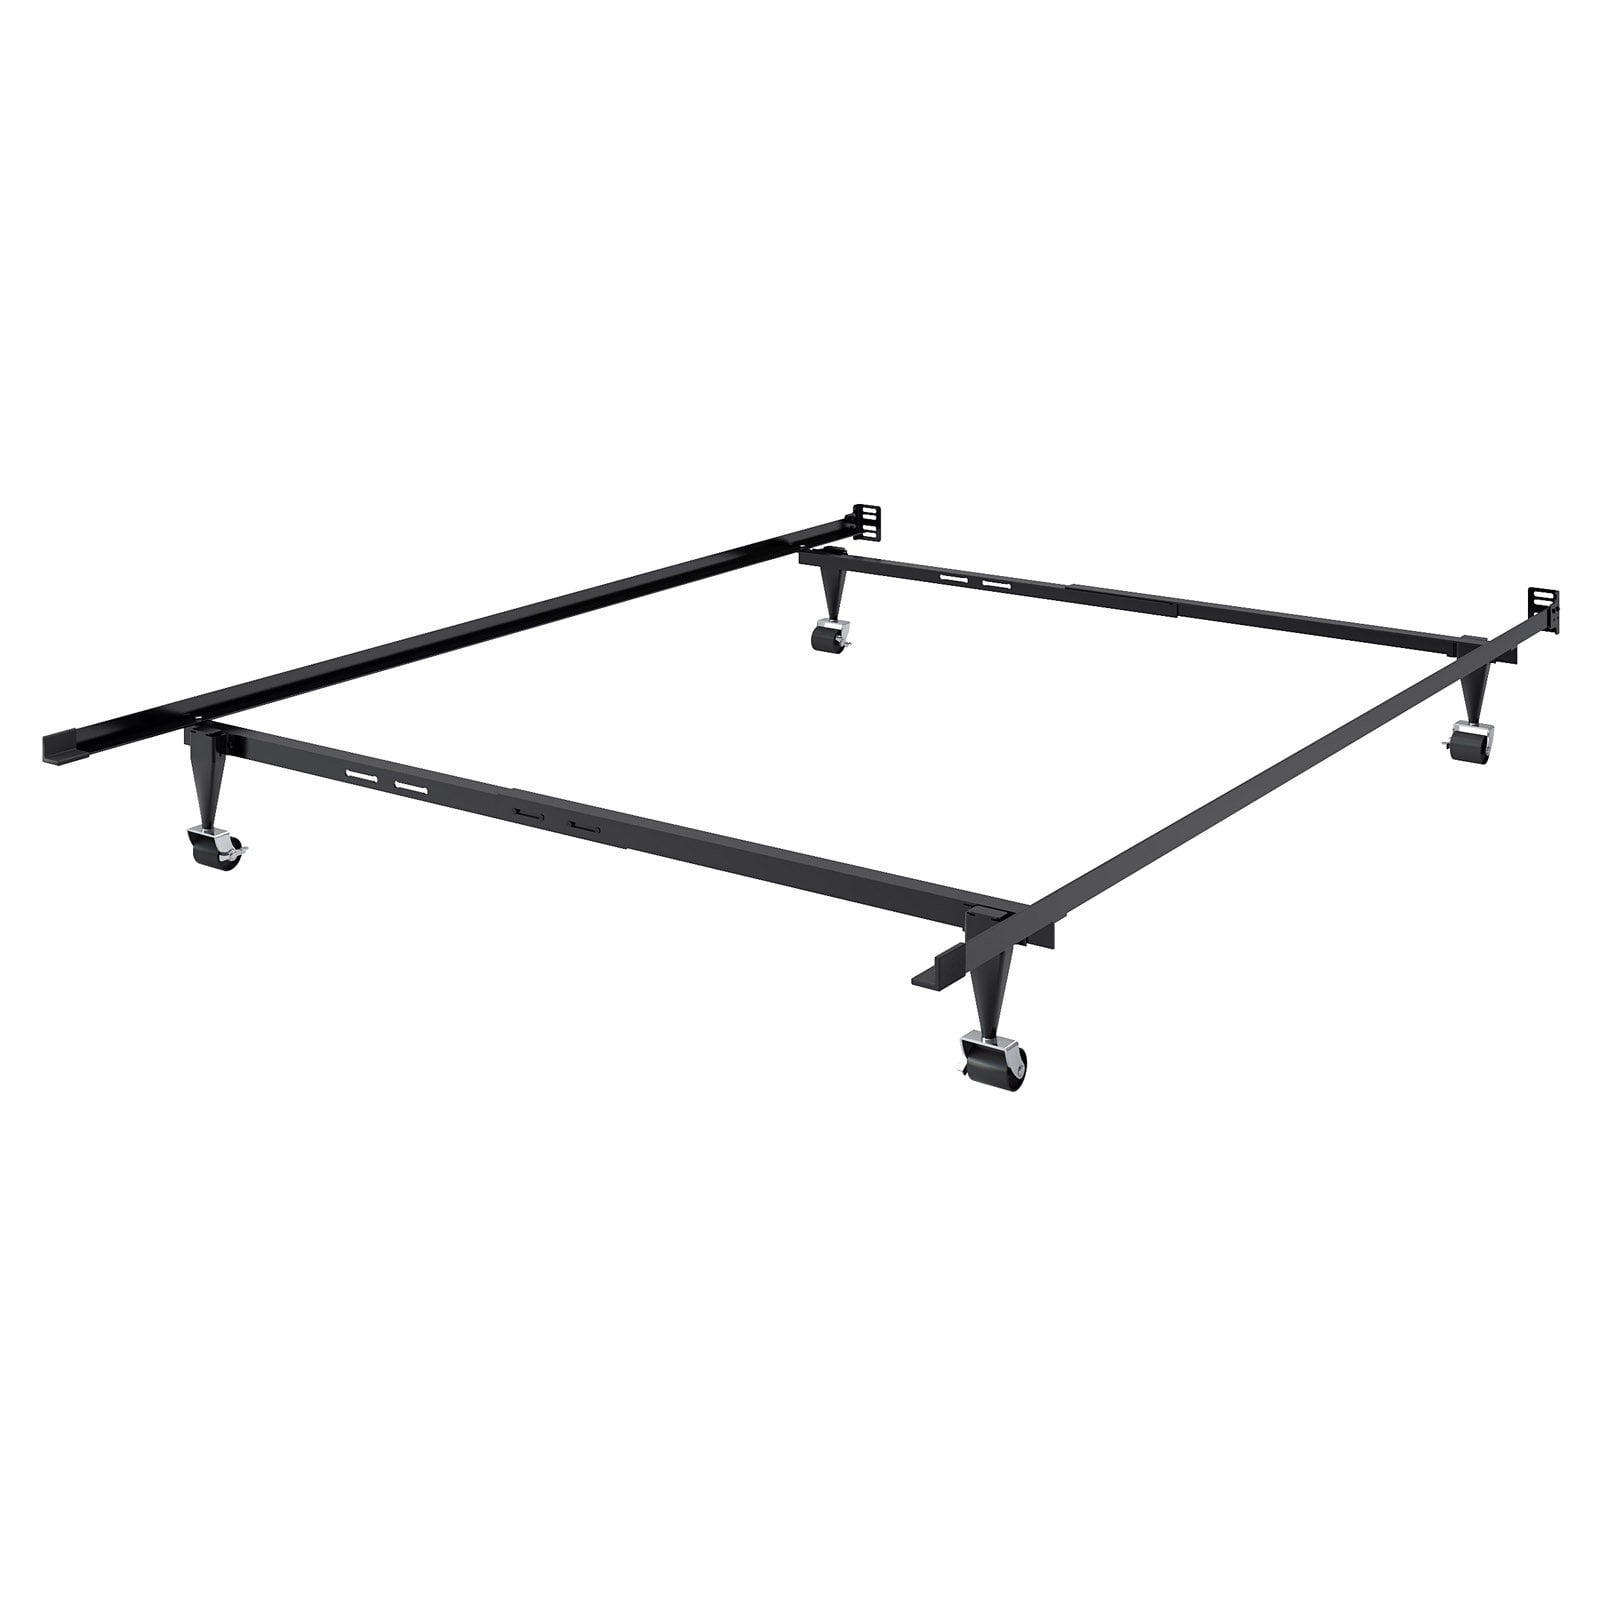 Full Double Metal Bed Frame, How To Put Together An Adjustable Metal Bed Frame